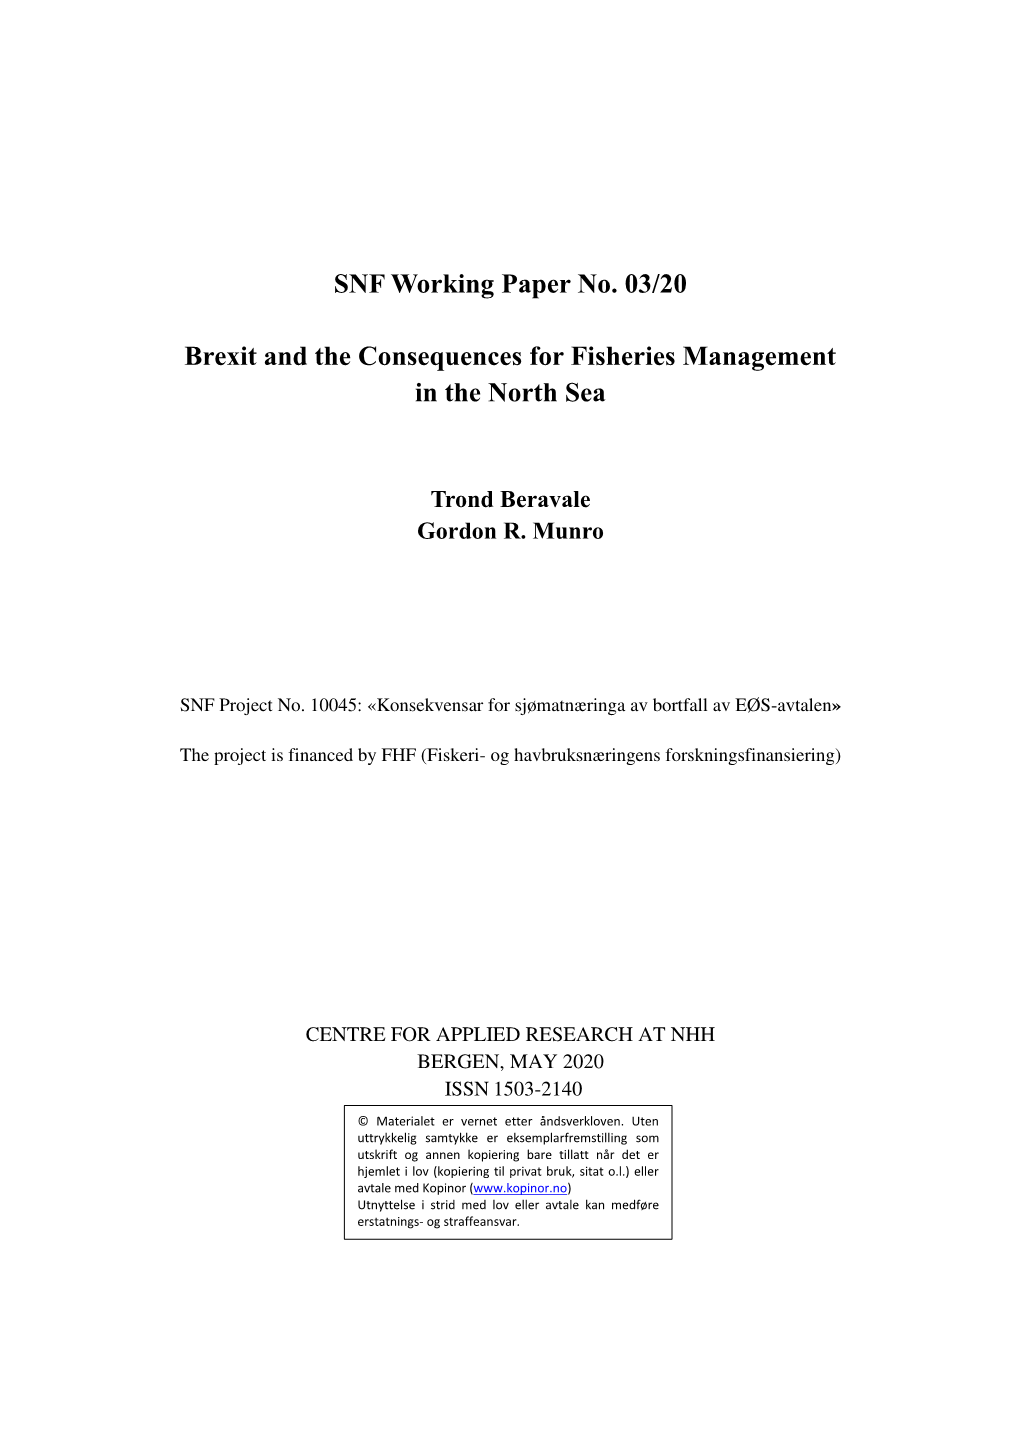 SNF Working Paper No. 03/20 Brexit and the Consequences For